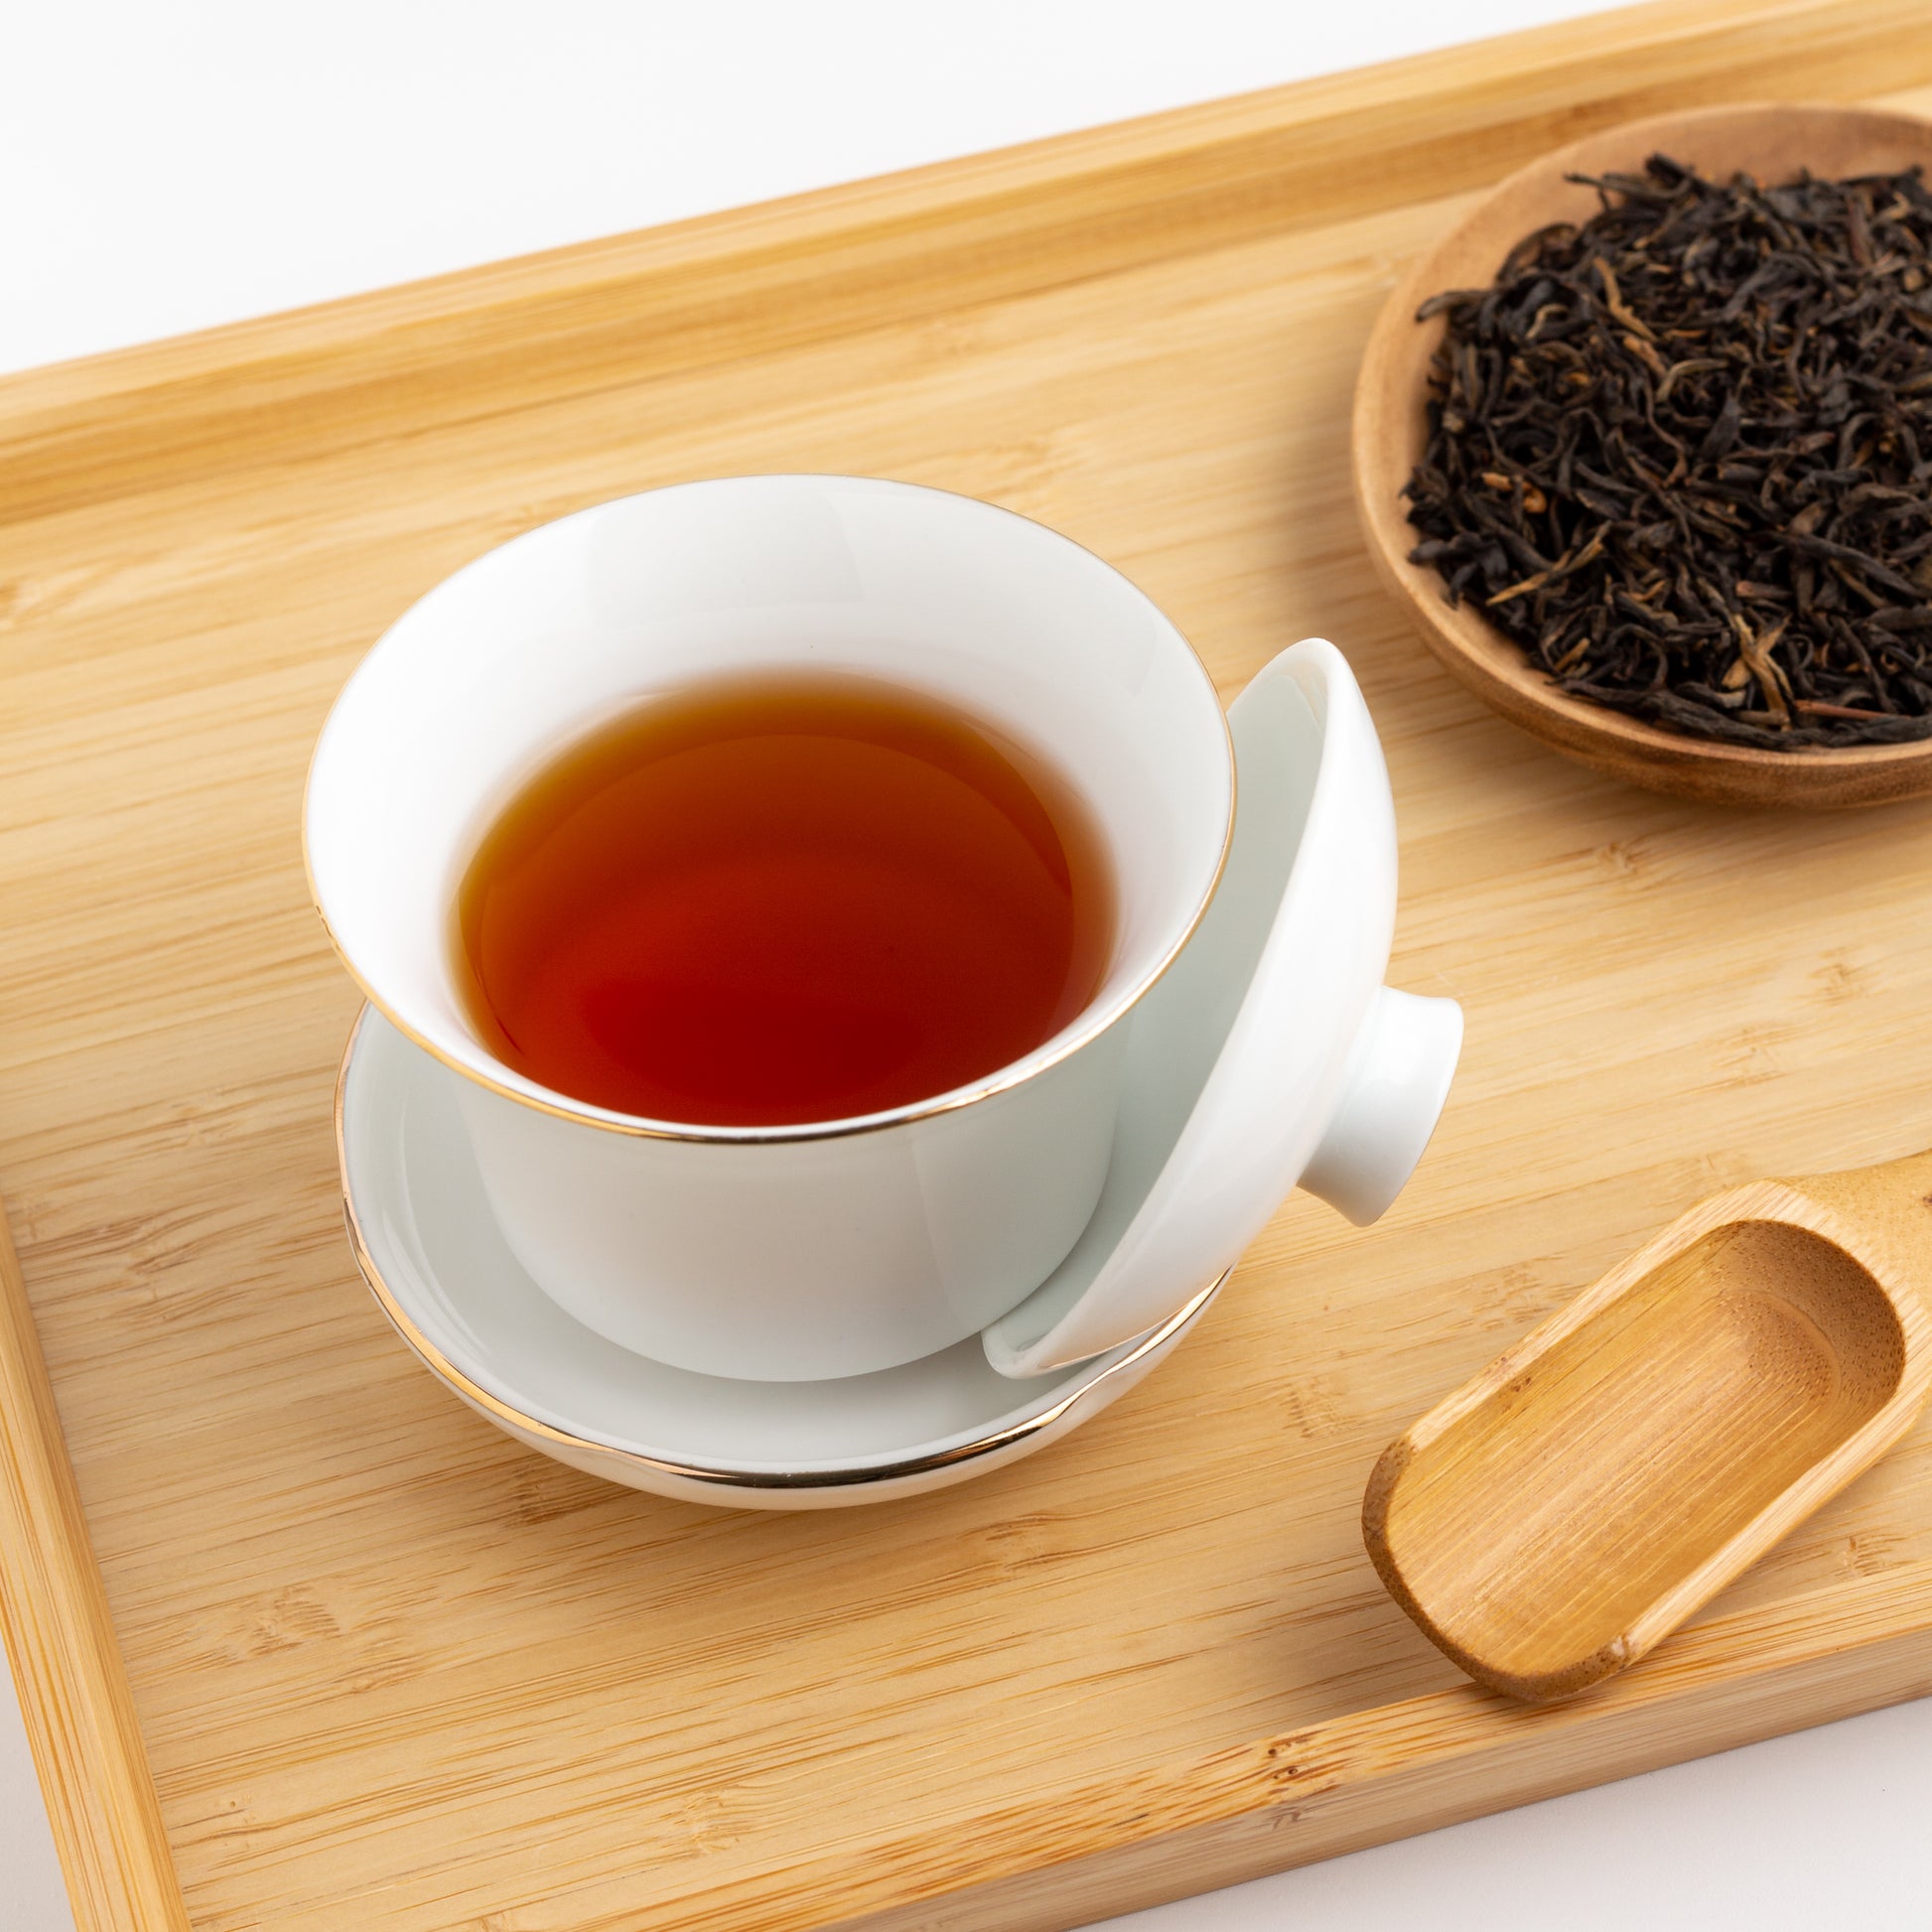 Golden Yunnan Organic Black Tea shown brewed in a white gaiwan cup on a wooden tray.